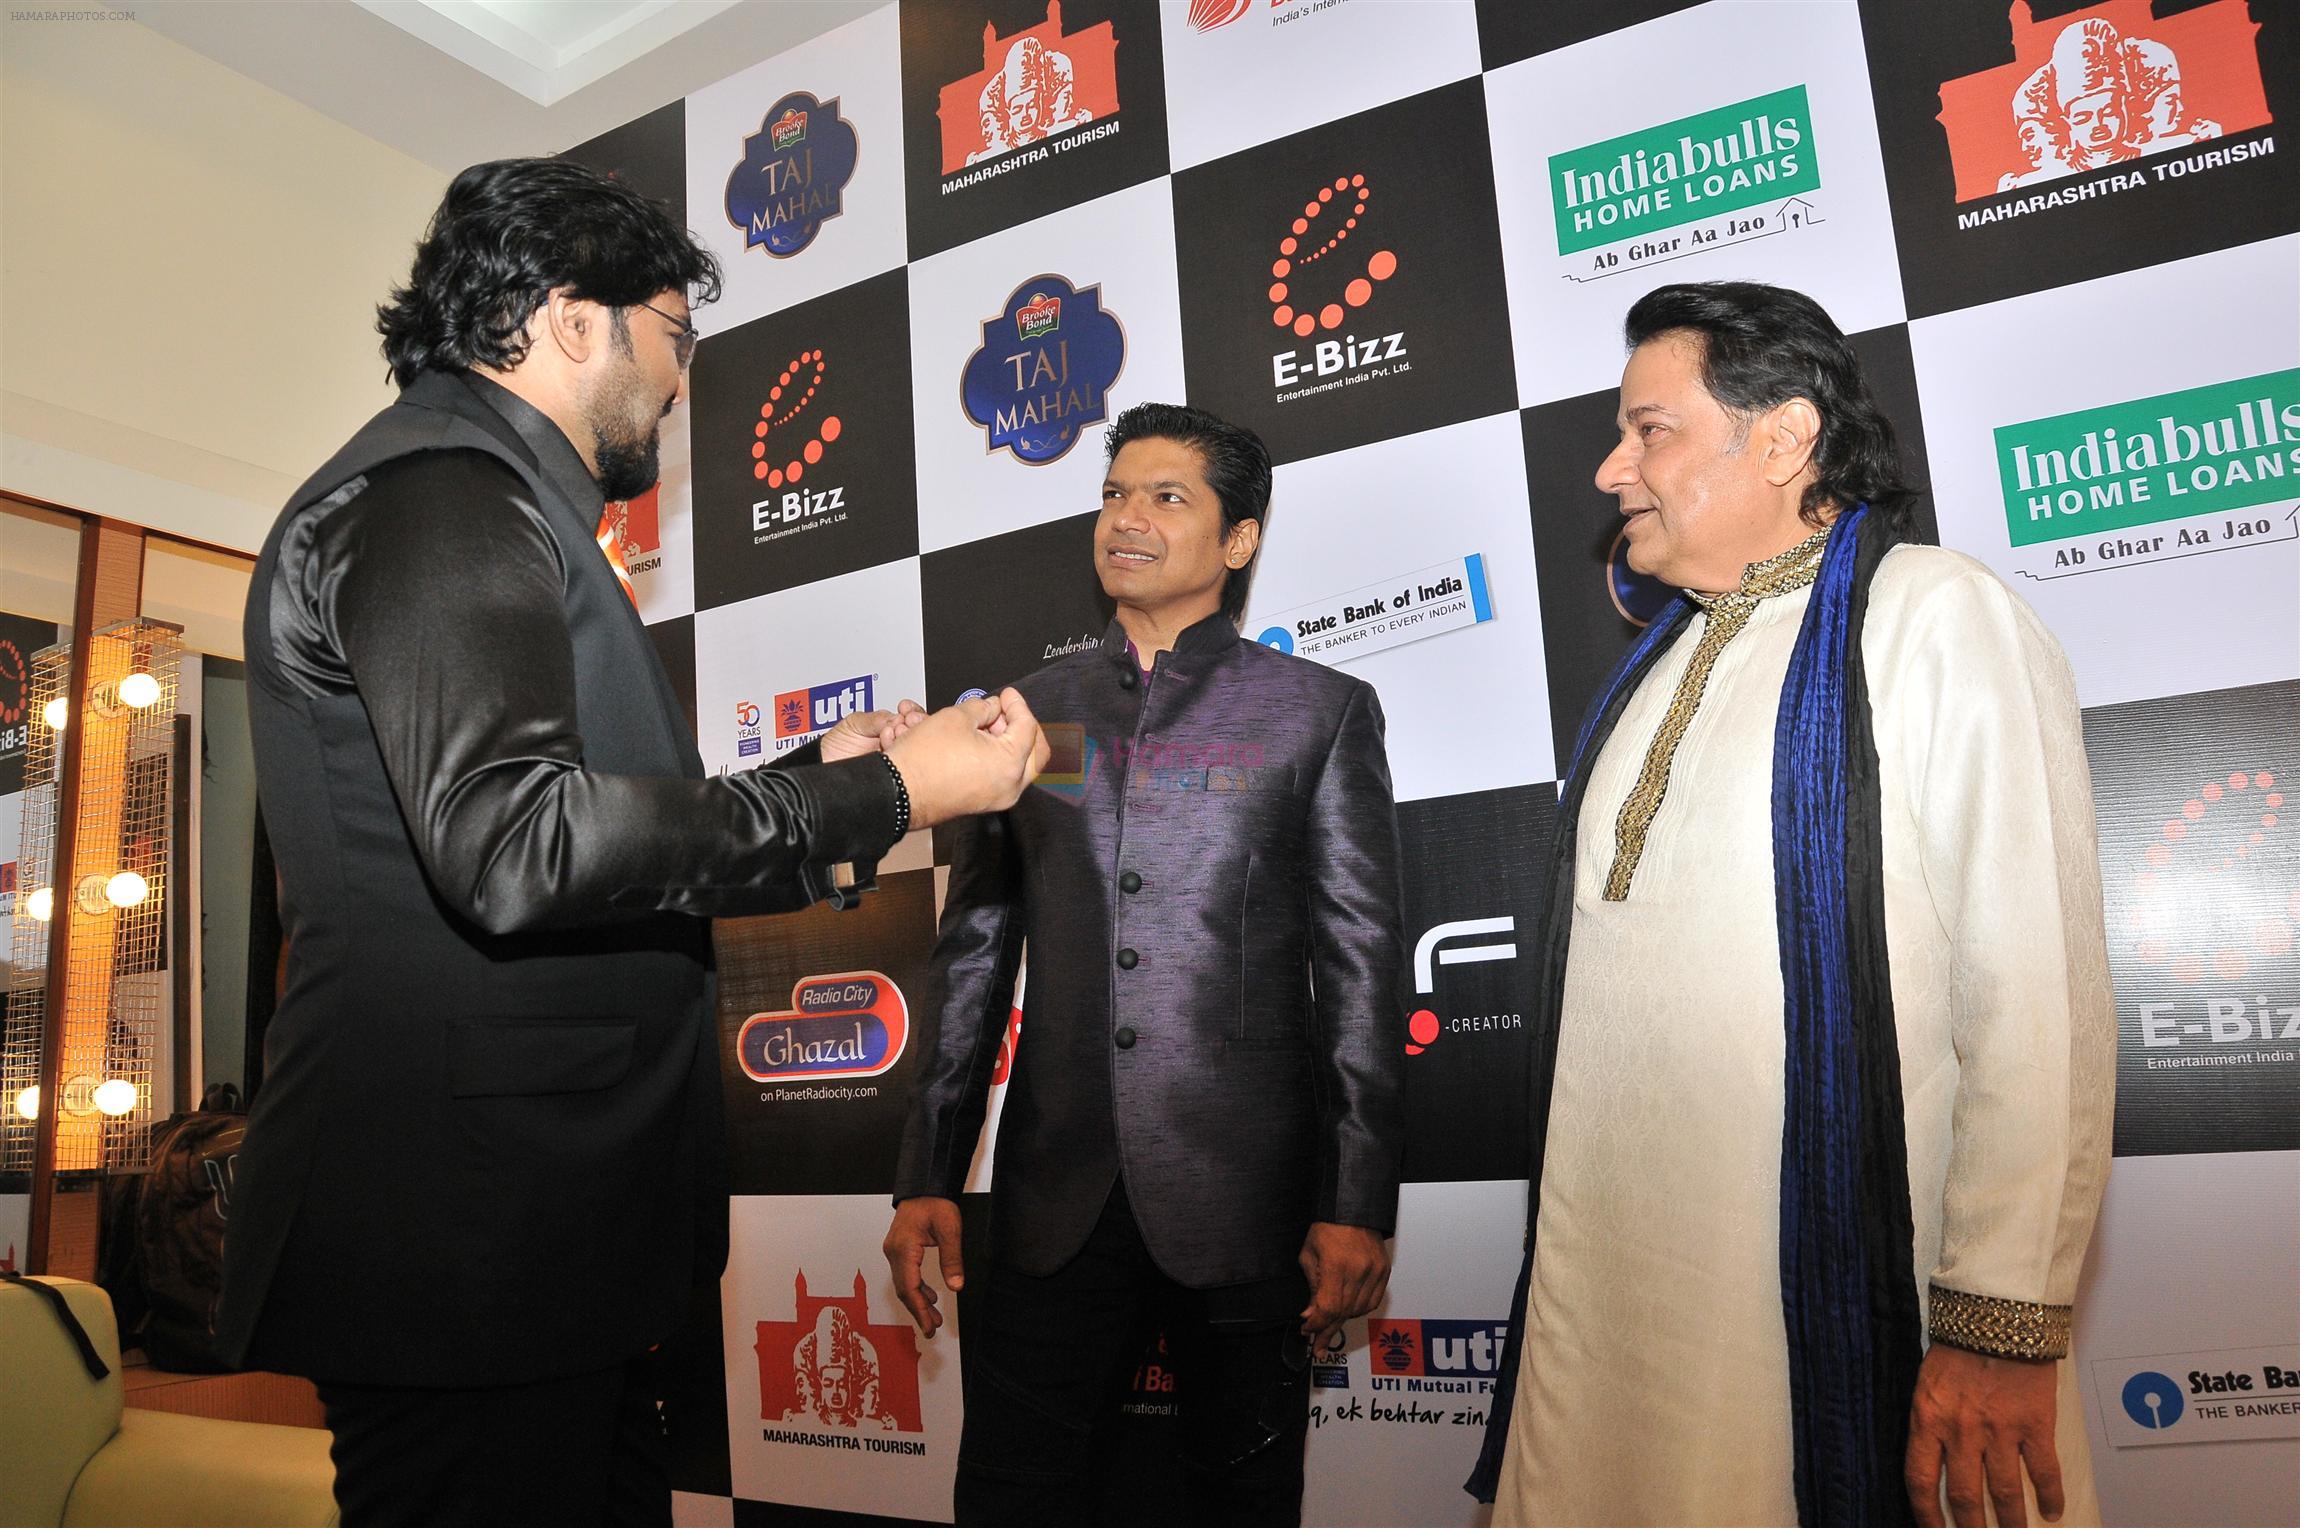 Anup jalota, Shaan, babul Supriyo at the Tribute to Jagjit Singh with musical concert Rehmatein in Mumbai on 18th July 2015